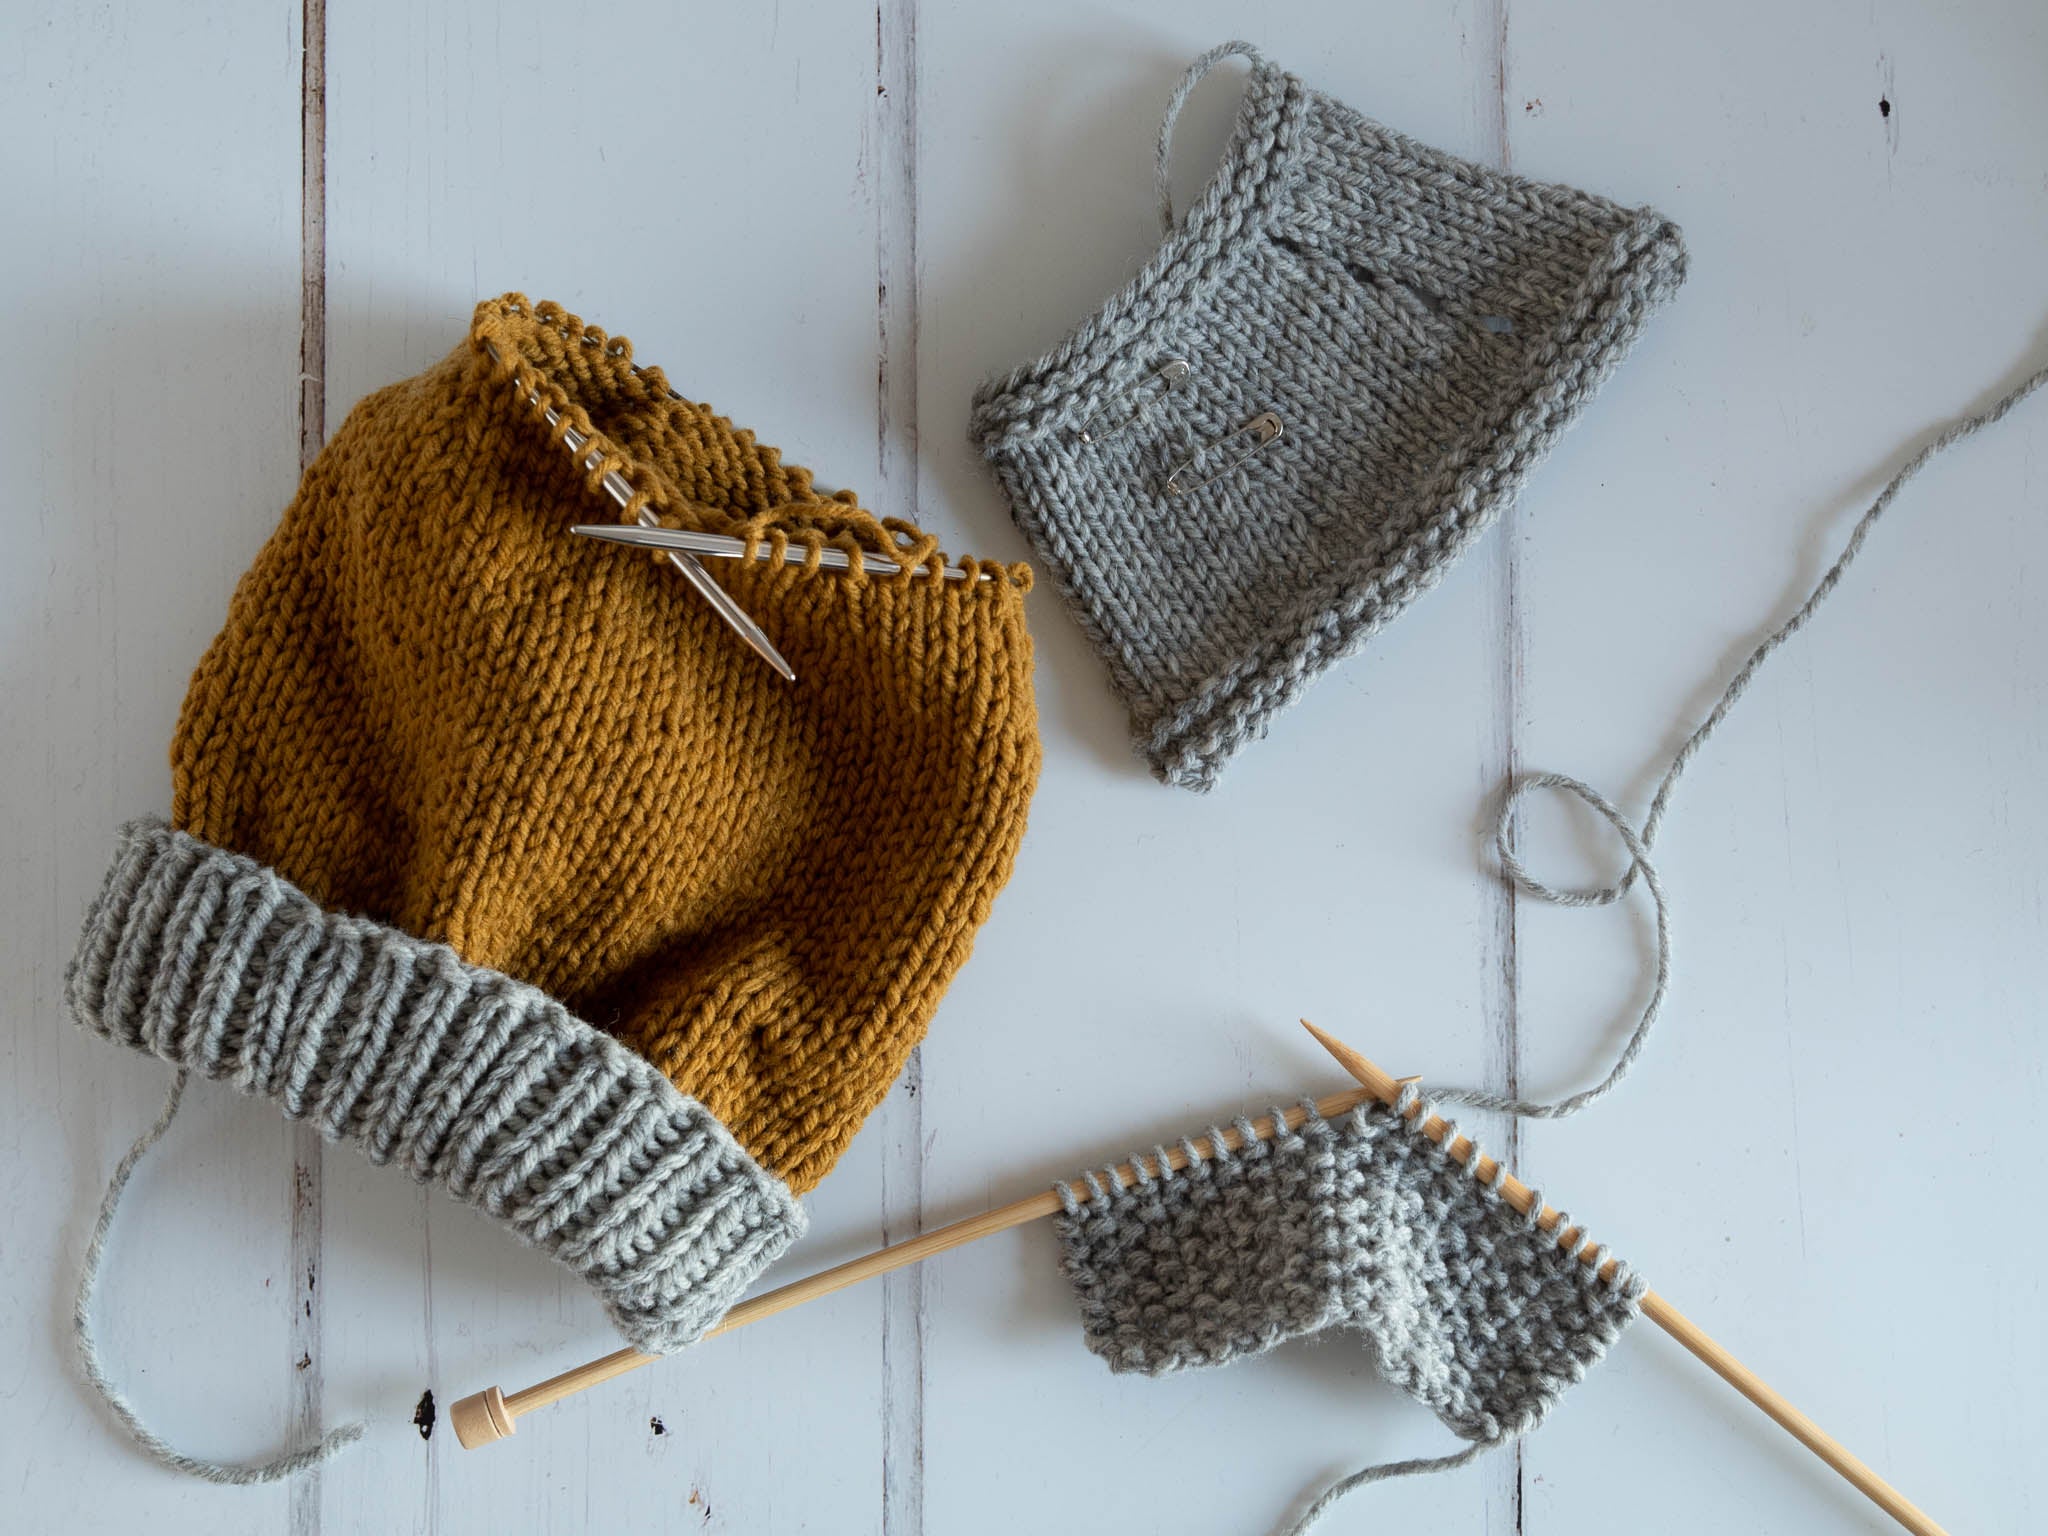 Learn to knit: How to knit in the round - Ysolda